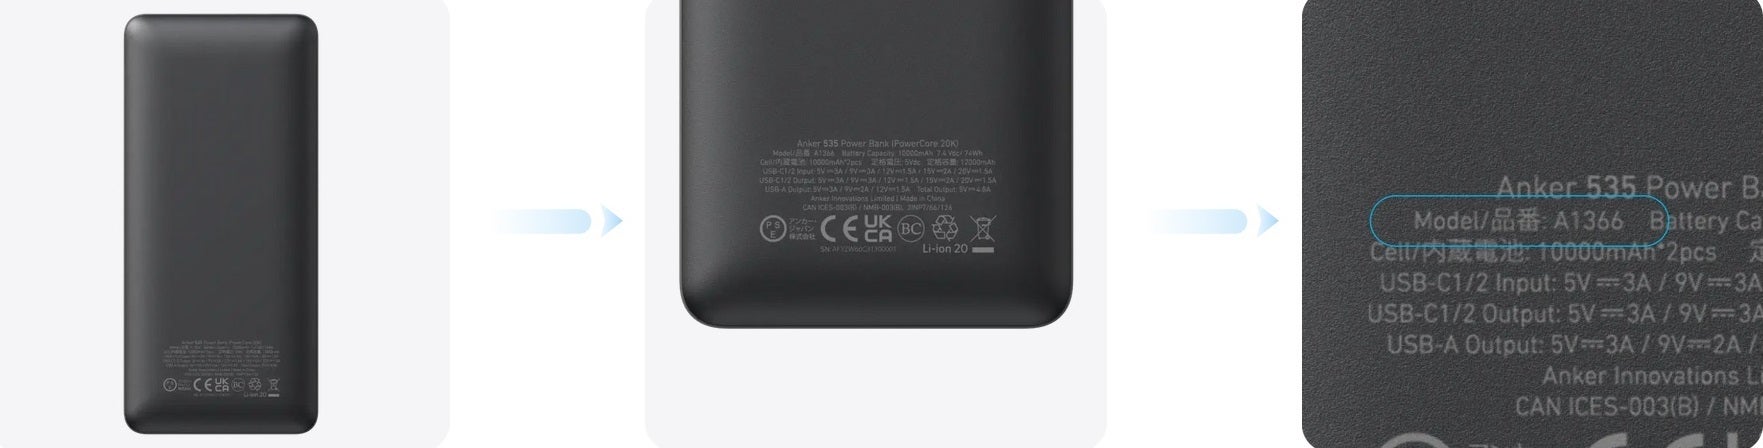 If you own this Anker power bank, please follow the instructions below for safe disposal.  If you own this power bank, you should safely dispose of it immediately.